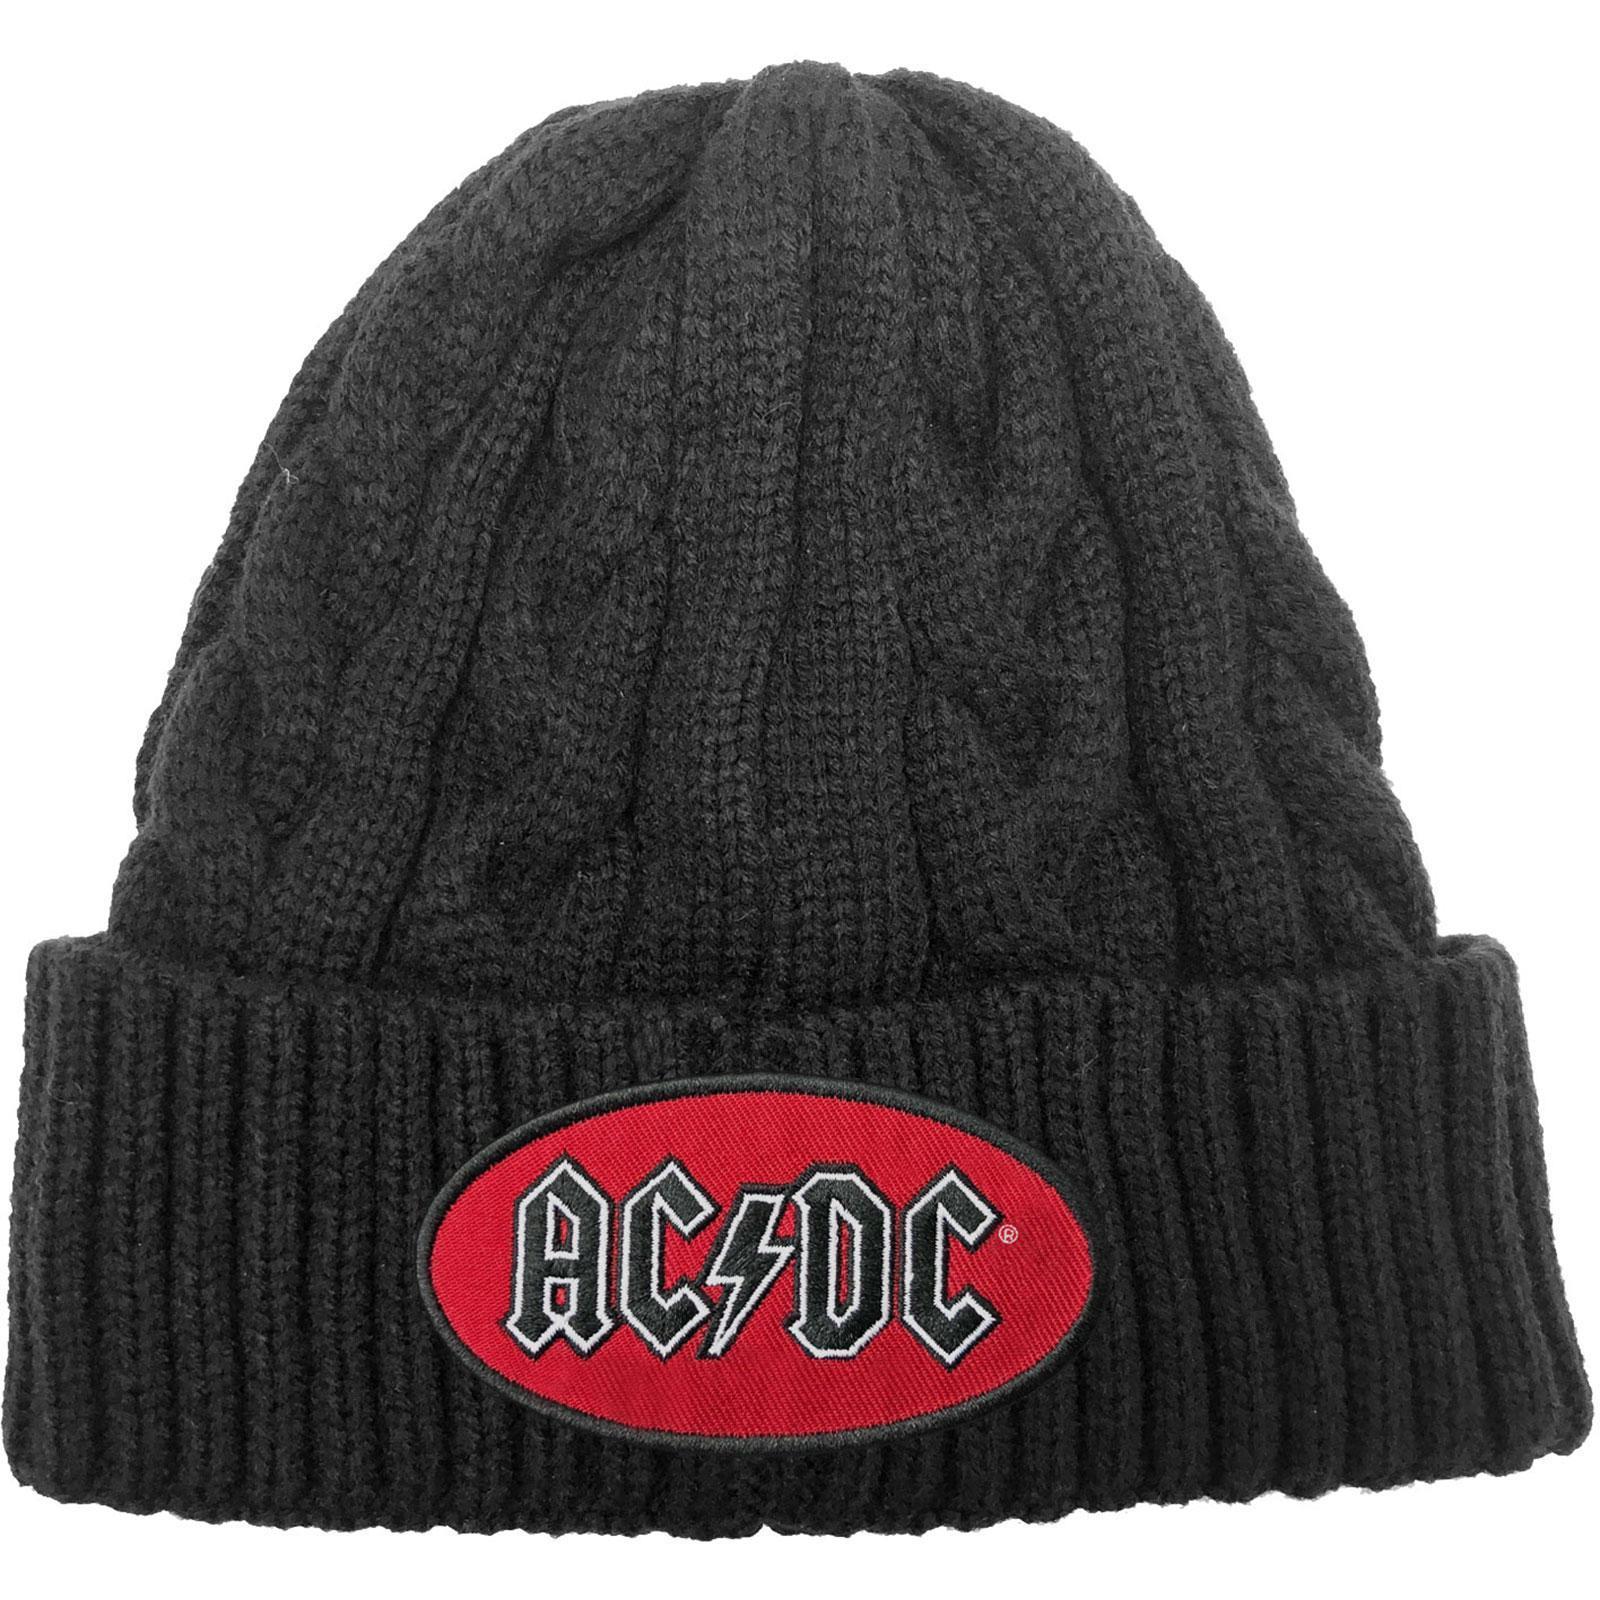 AC/DC Unisex Adult Oval Cable Knit Logo Beanie (Black) (One Size)